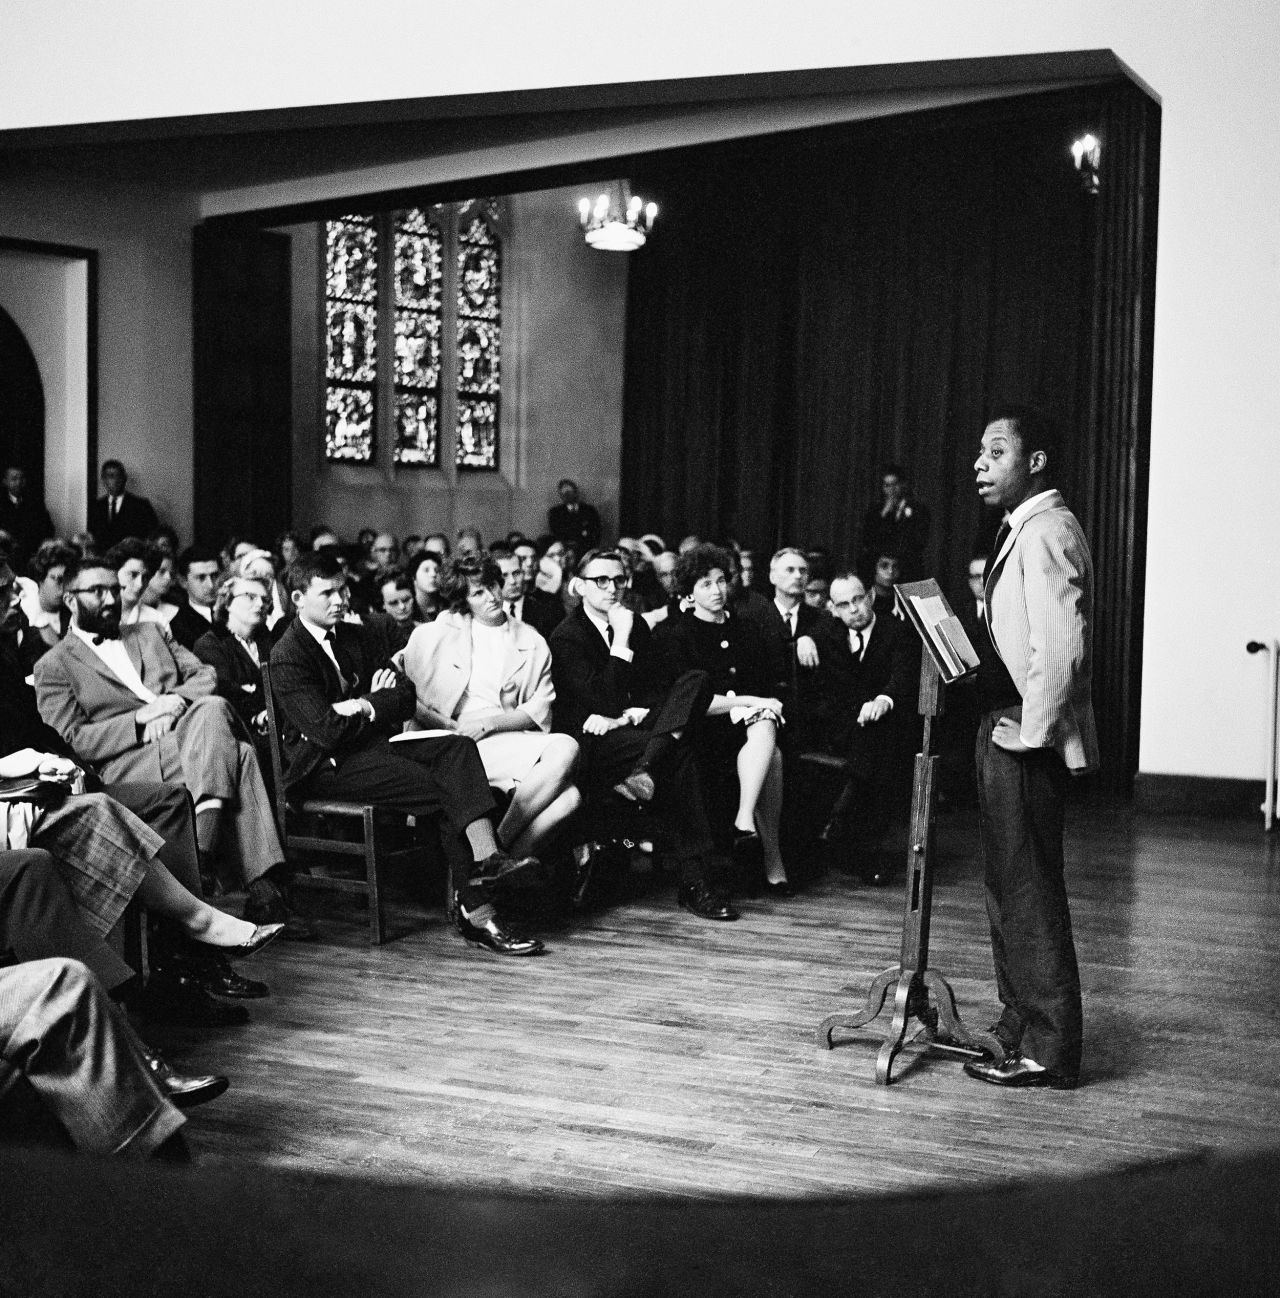 Author and activist James Baldwin gives a talk in Paris in 1963.